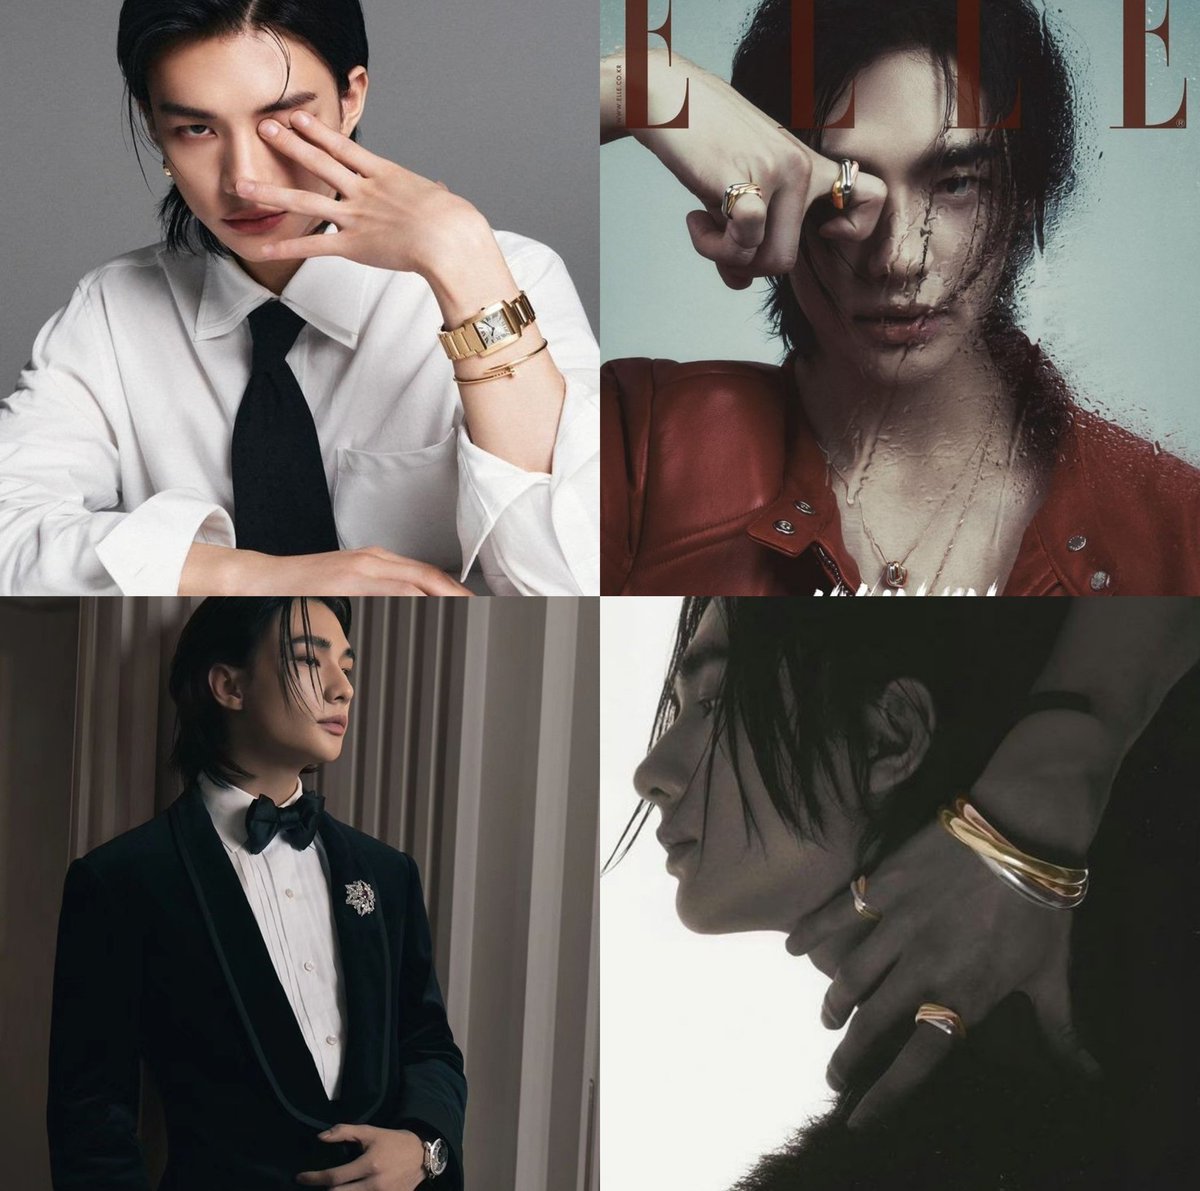 CARTIER
Fit for a prince, Hyunjin’s had quite a few opportunities with Cartier. One being for Esquire Magazine, another for ELLE magazine, and the other for a very exclusive exhibition showcasing Cartier’s Crystallisation of Time through various displays and models.